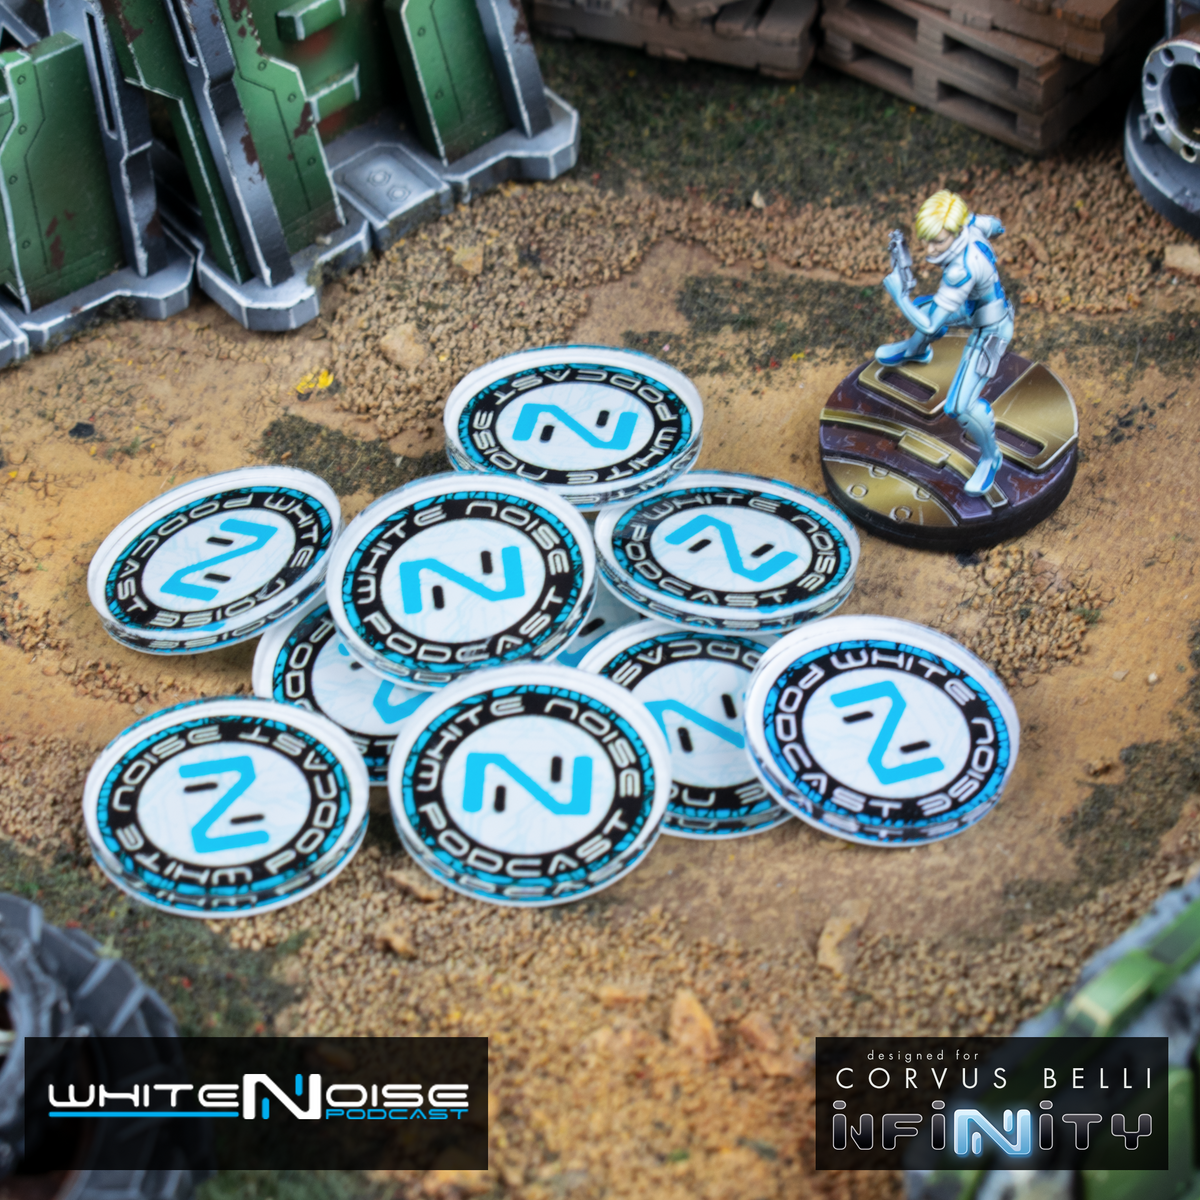 White Noise Support Markers